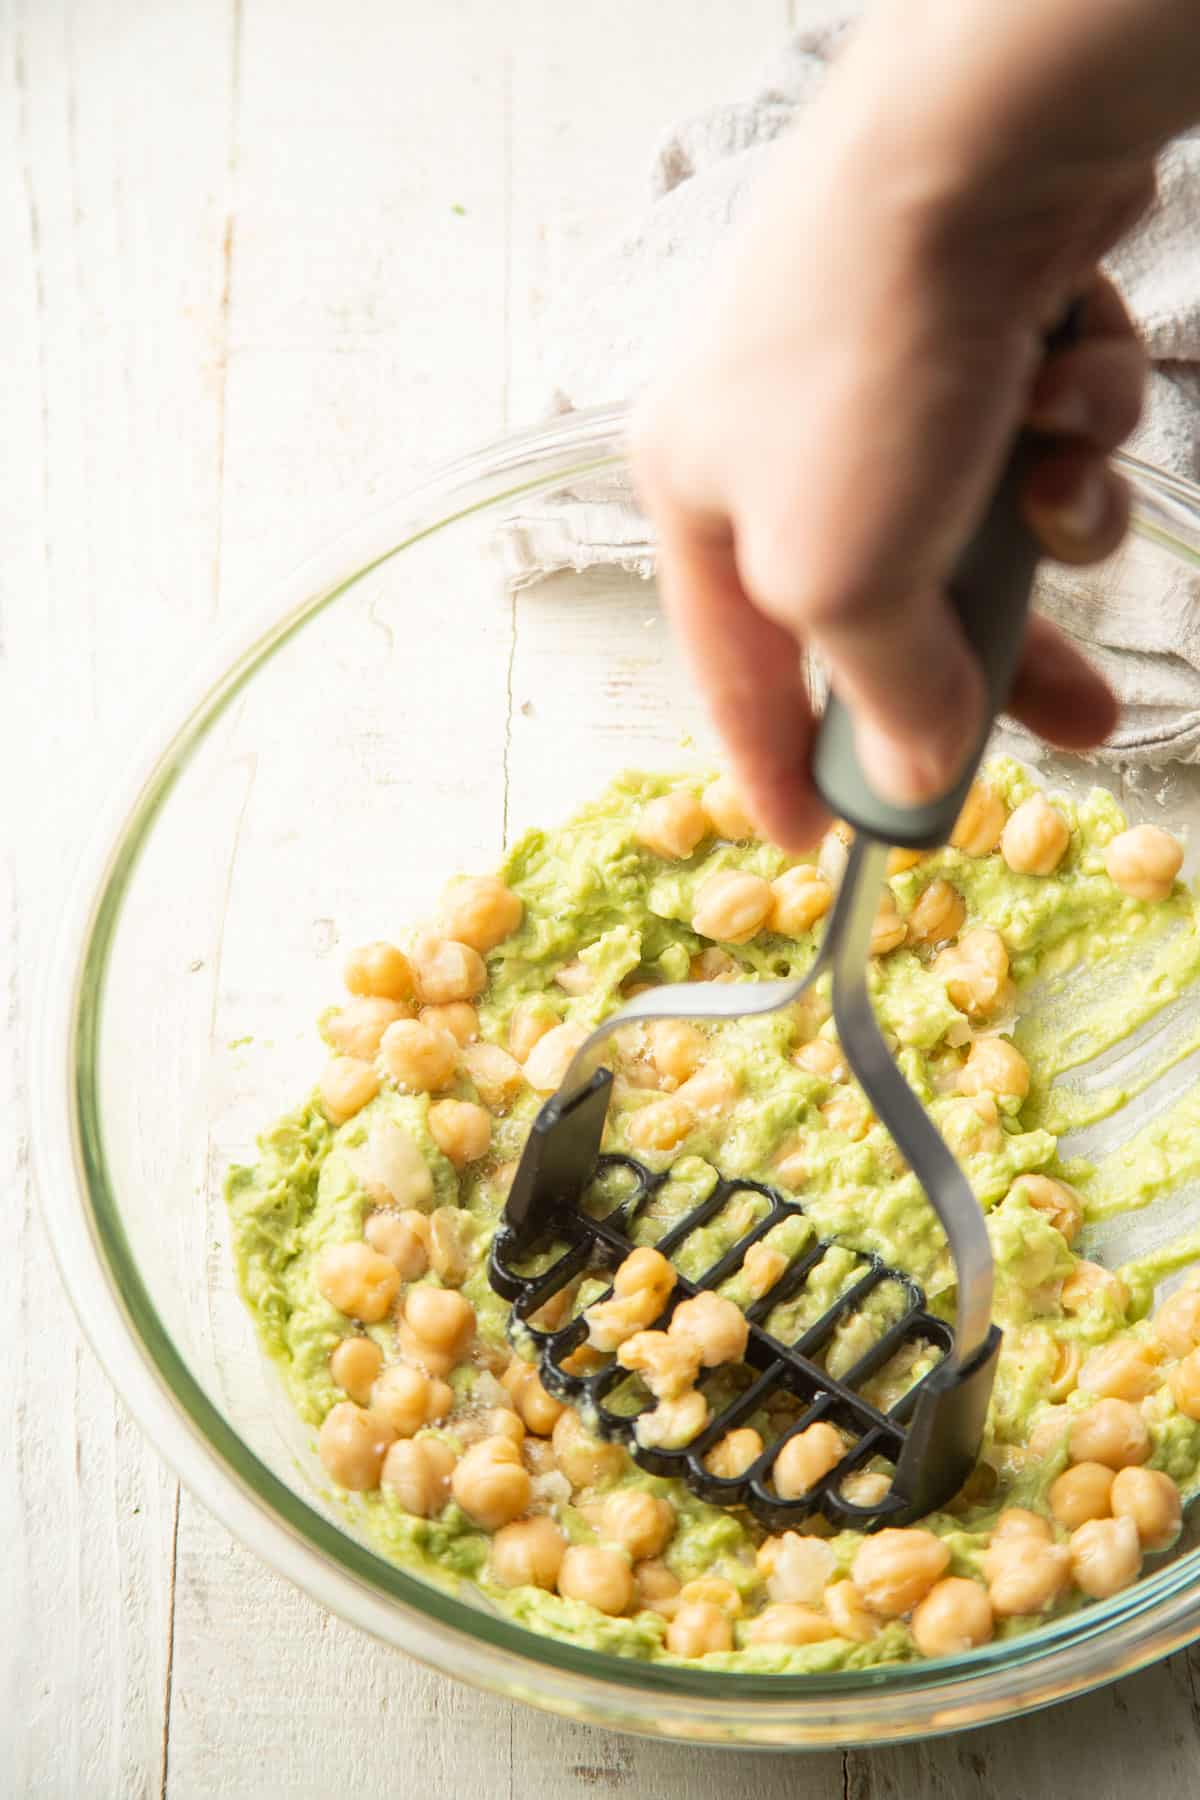 Hand with a potato masher smashing chickpeas in a bowl with avocado dressing.